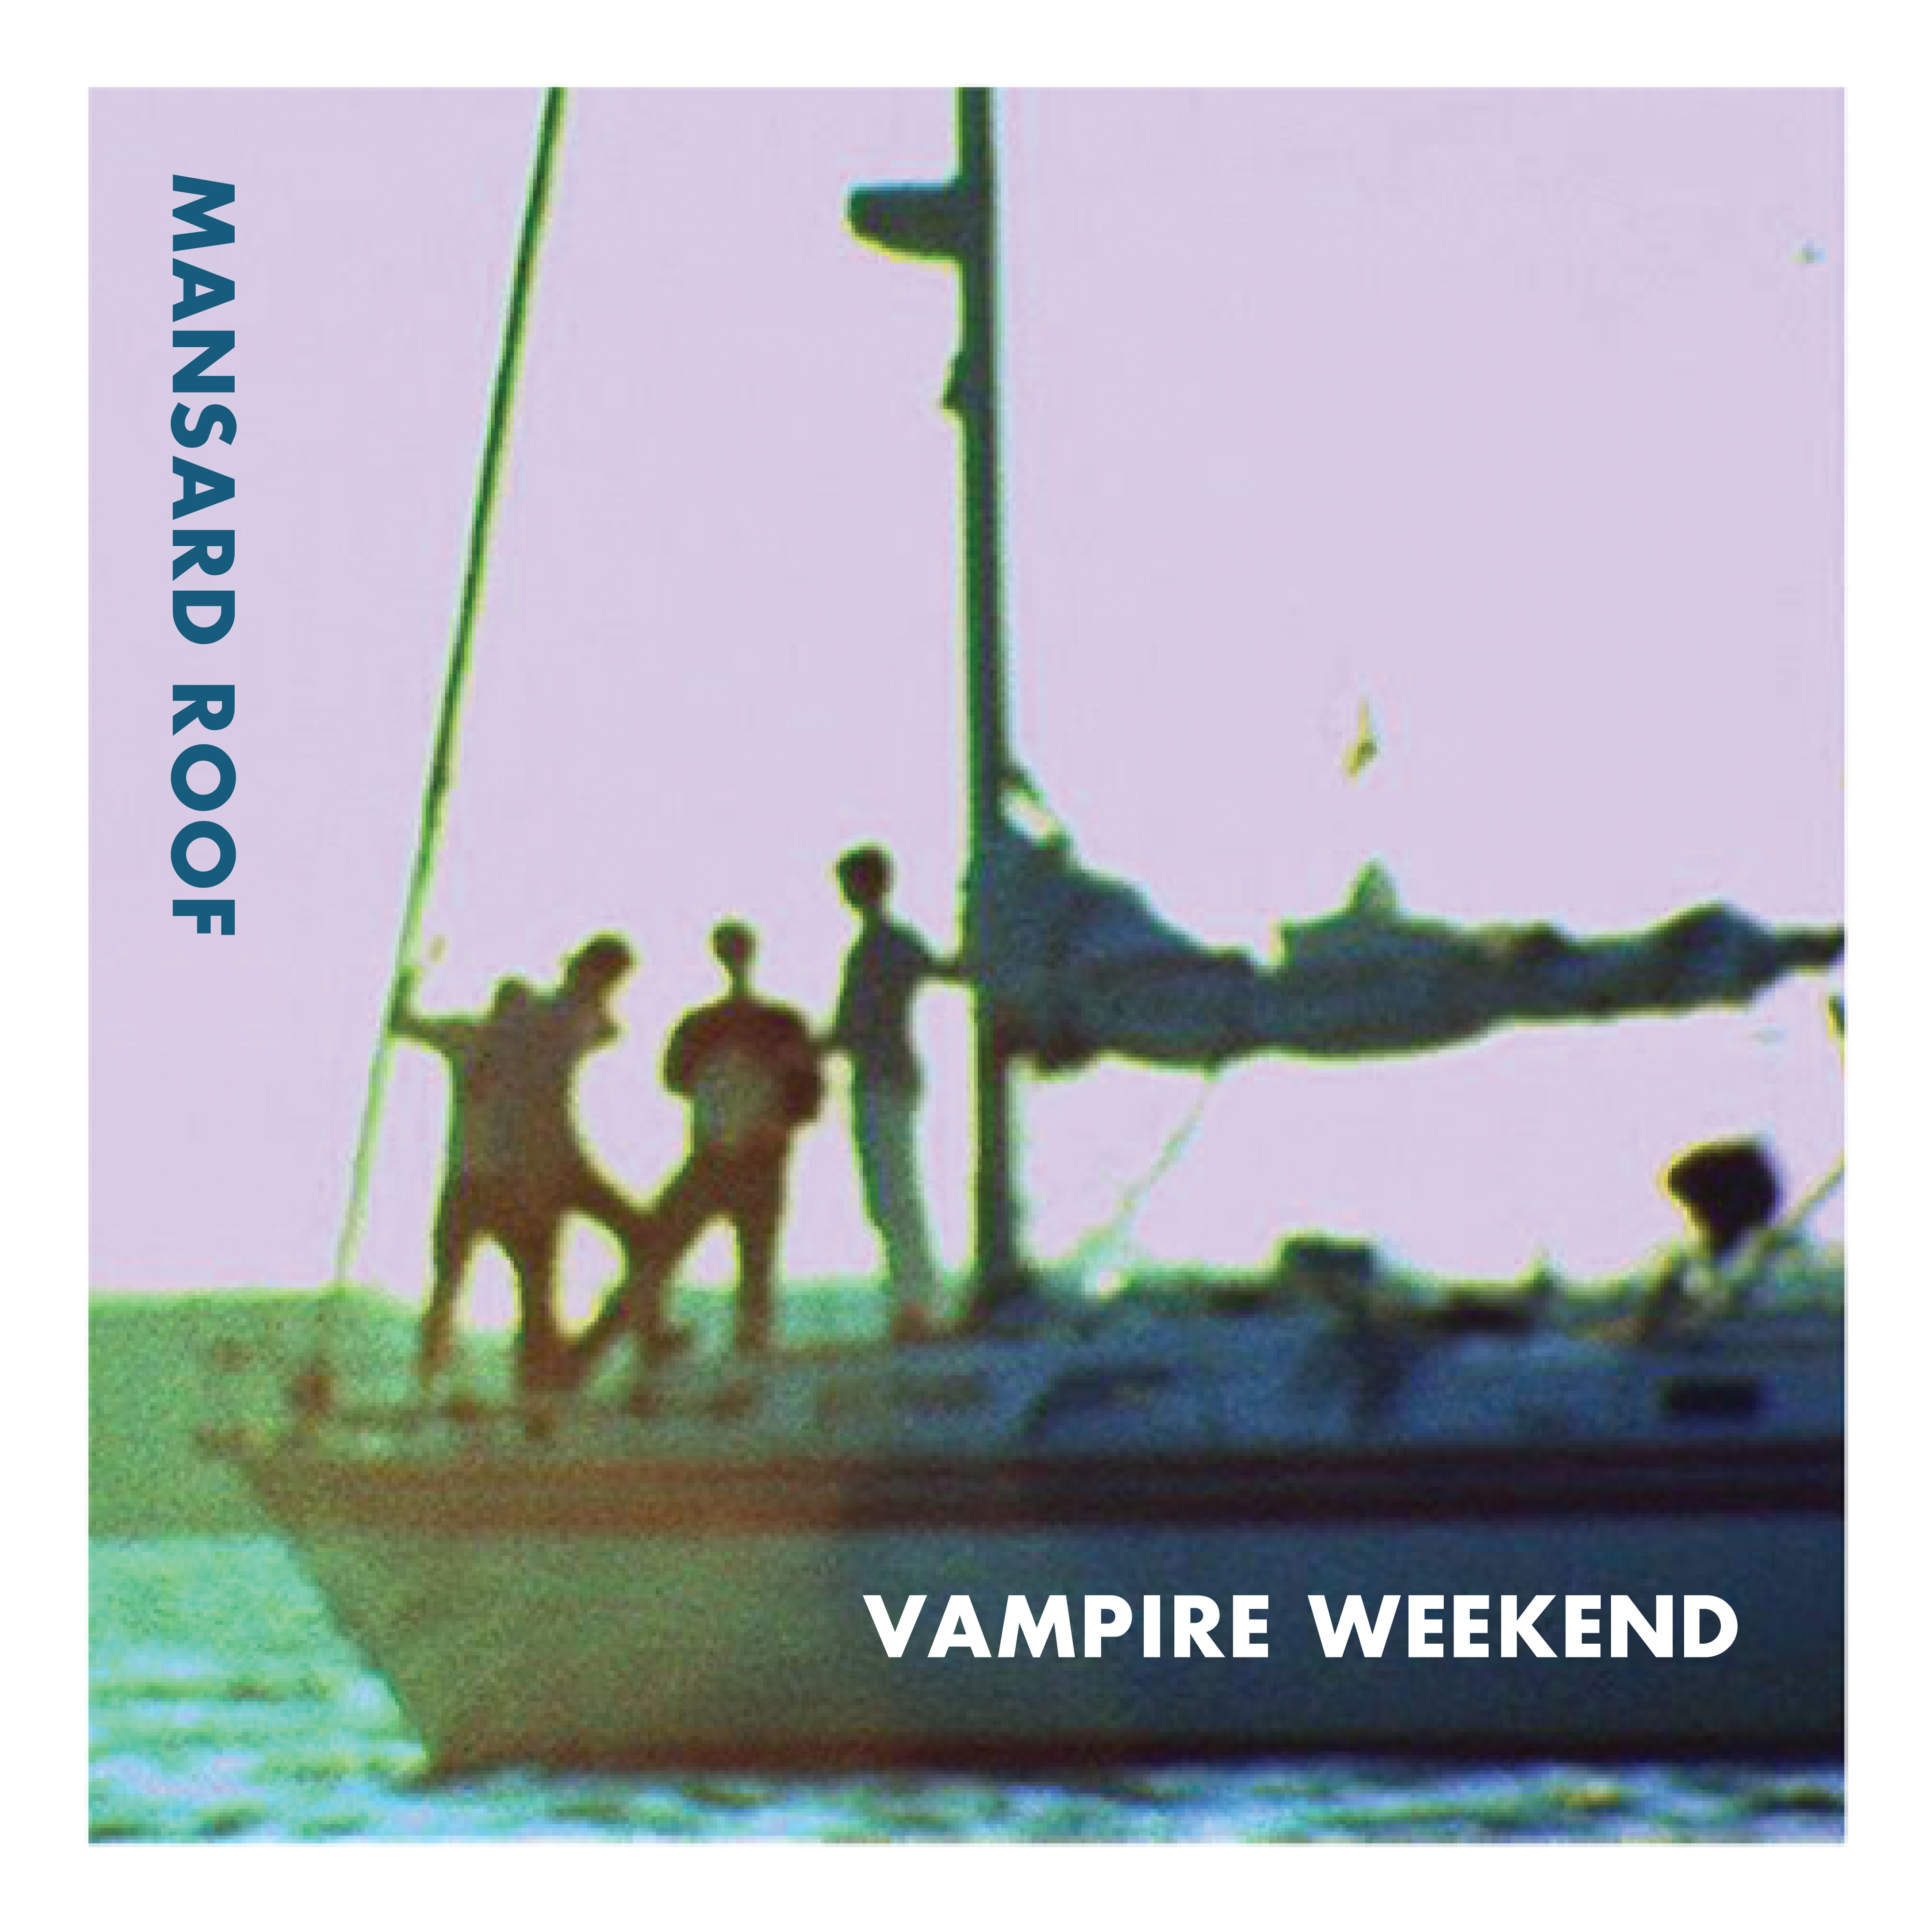 Vampire weekend only god was above us. Уикенд обложка альбома. Vampire weekend Vampire weekend обложка альбома. Vampire weekend contra обложка альбома. Vampire weekend - a-Punk, Mansard Roof, the Kids don't Stand a chance - 45 RPM Singles, 2008.